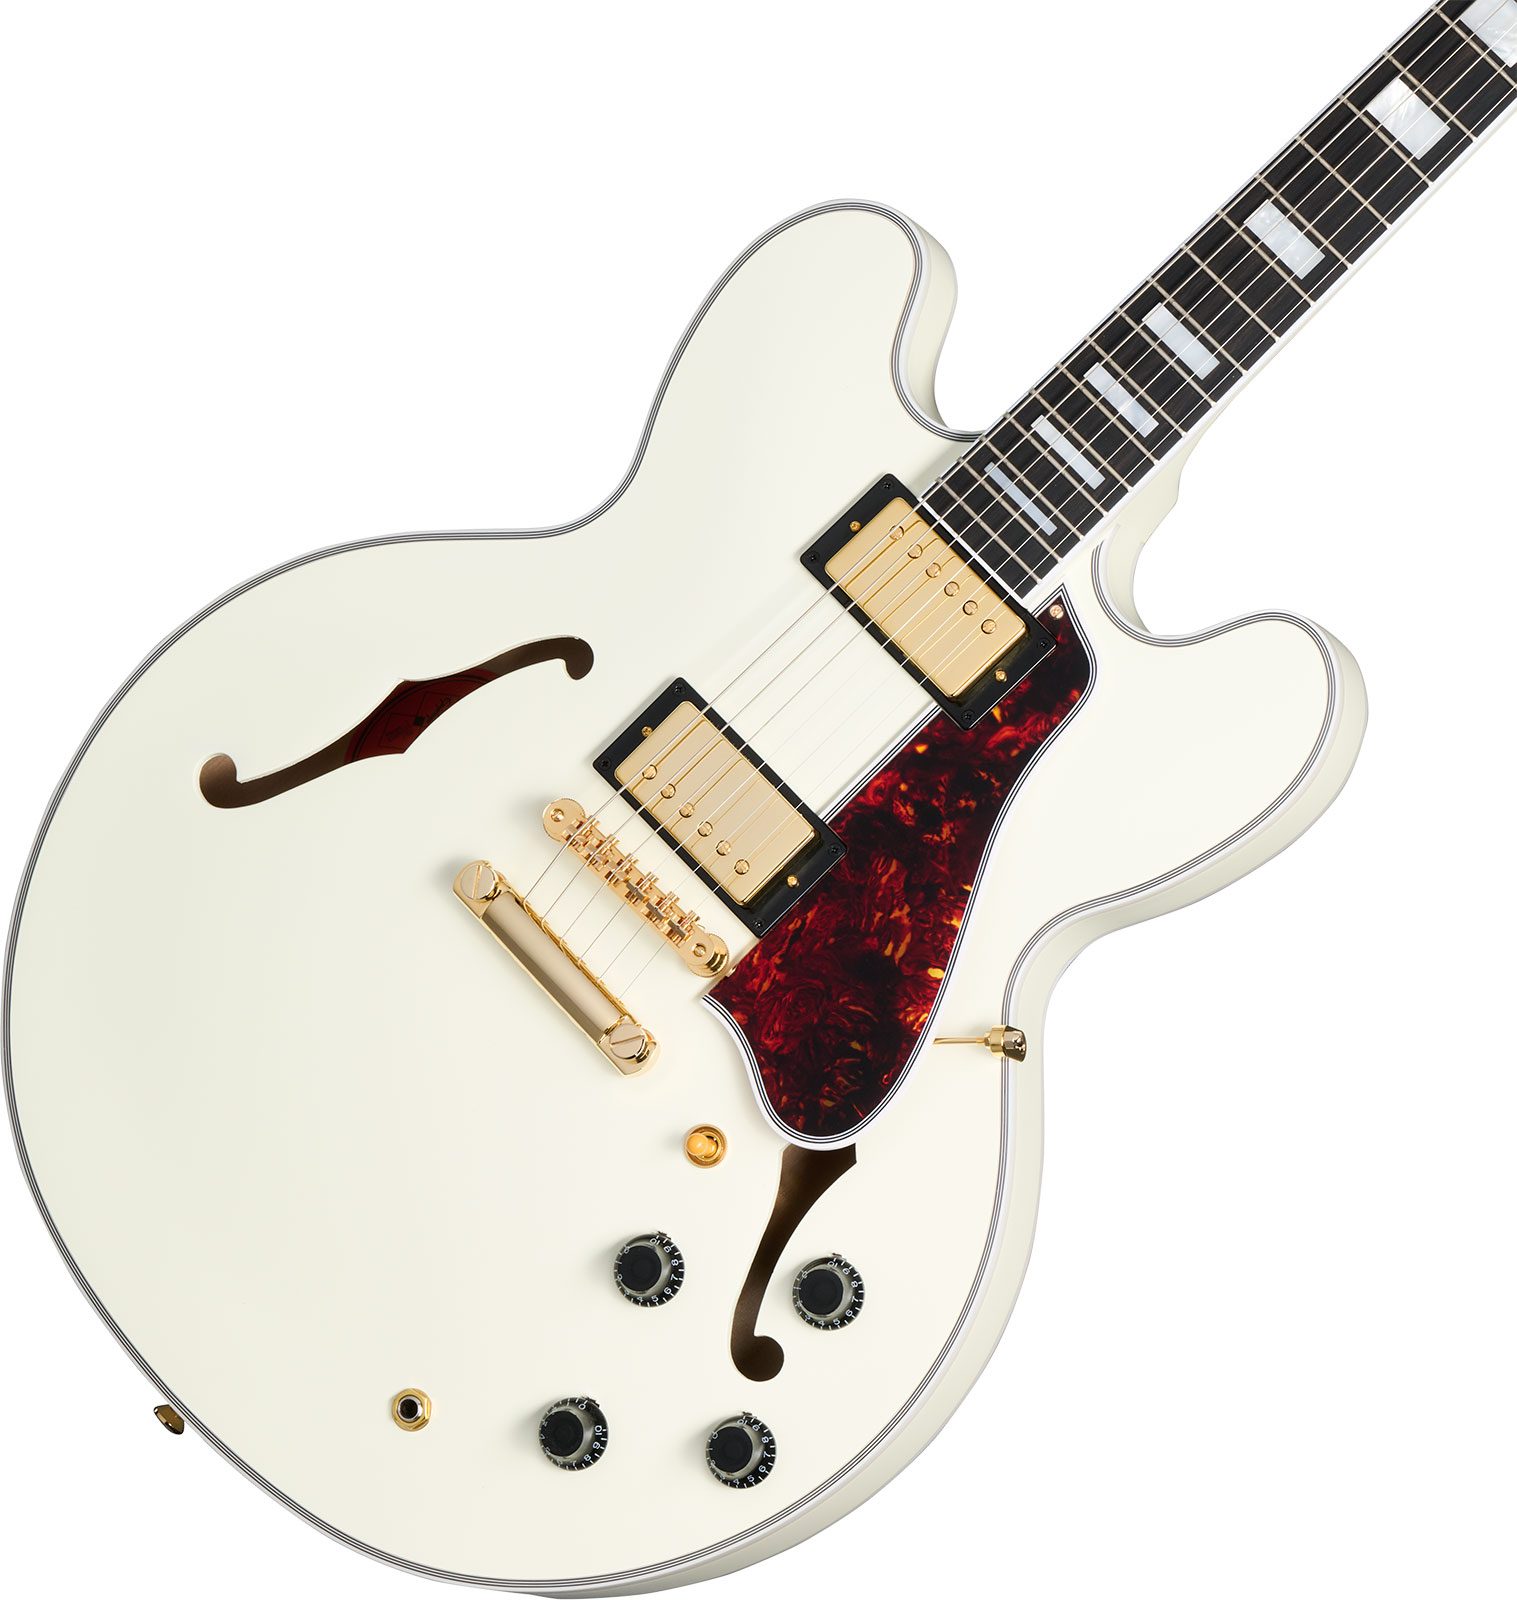 Epiphone Es355 1959 Inspired By 2h Gibson Ht Eb - Vos Classic White - Semi-Hollow E-Gitarre - Variation 3